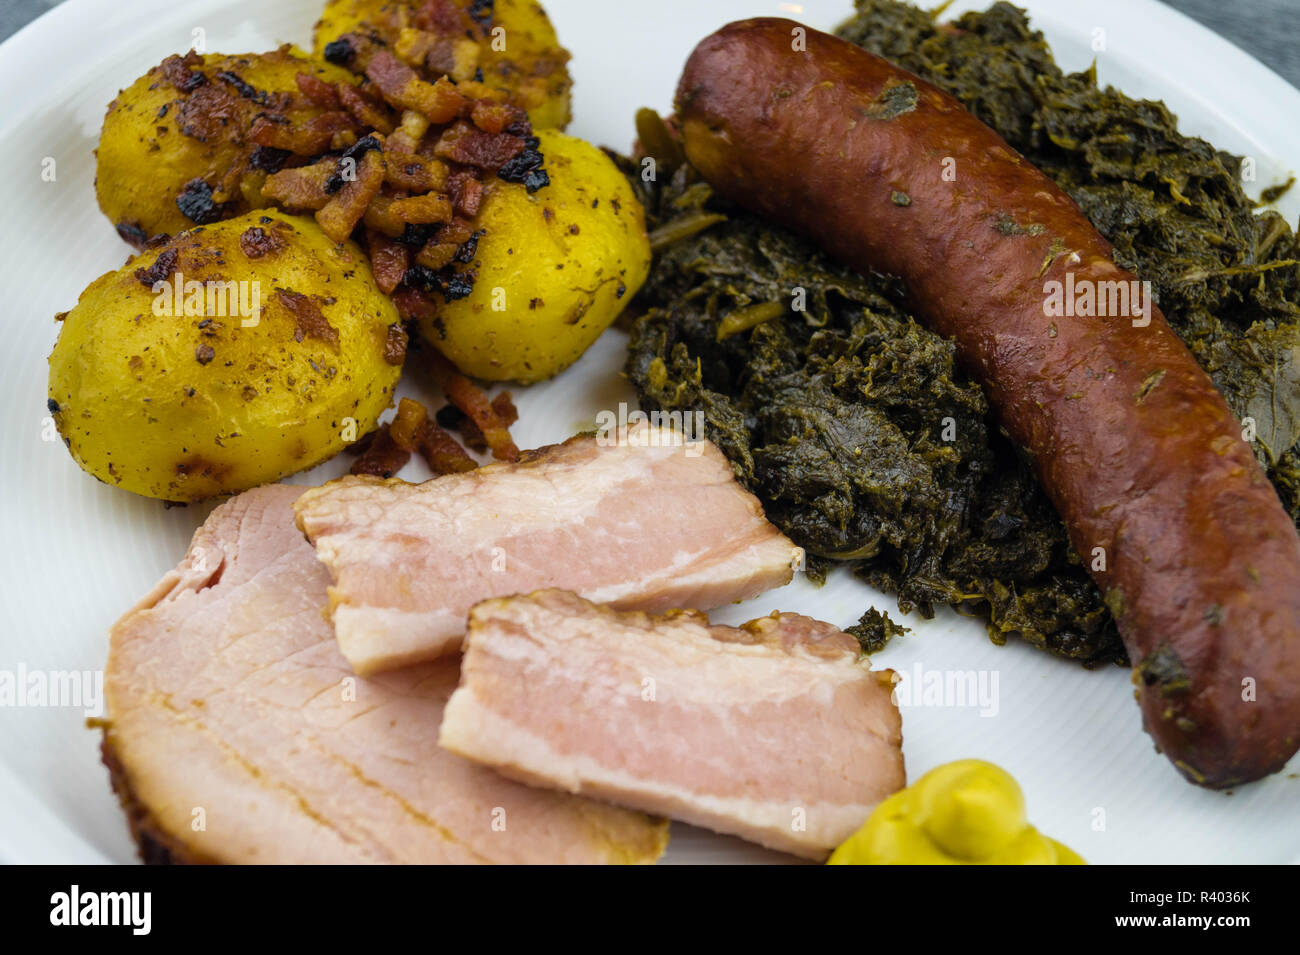 traditional northern german Food curly Kale with pork Bacon and sausages Stock Photo